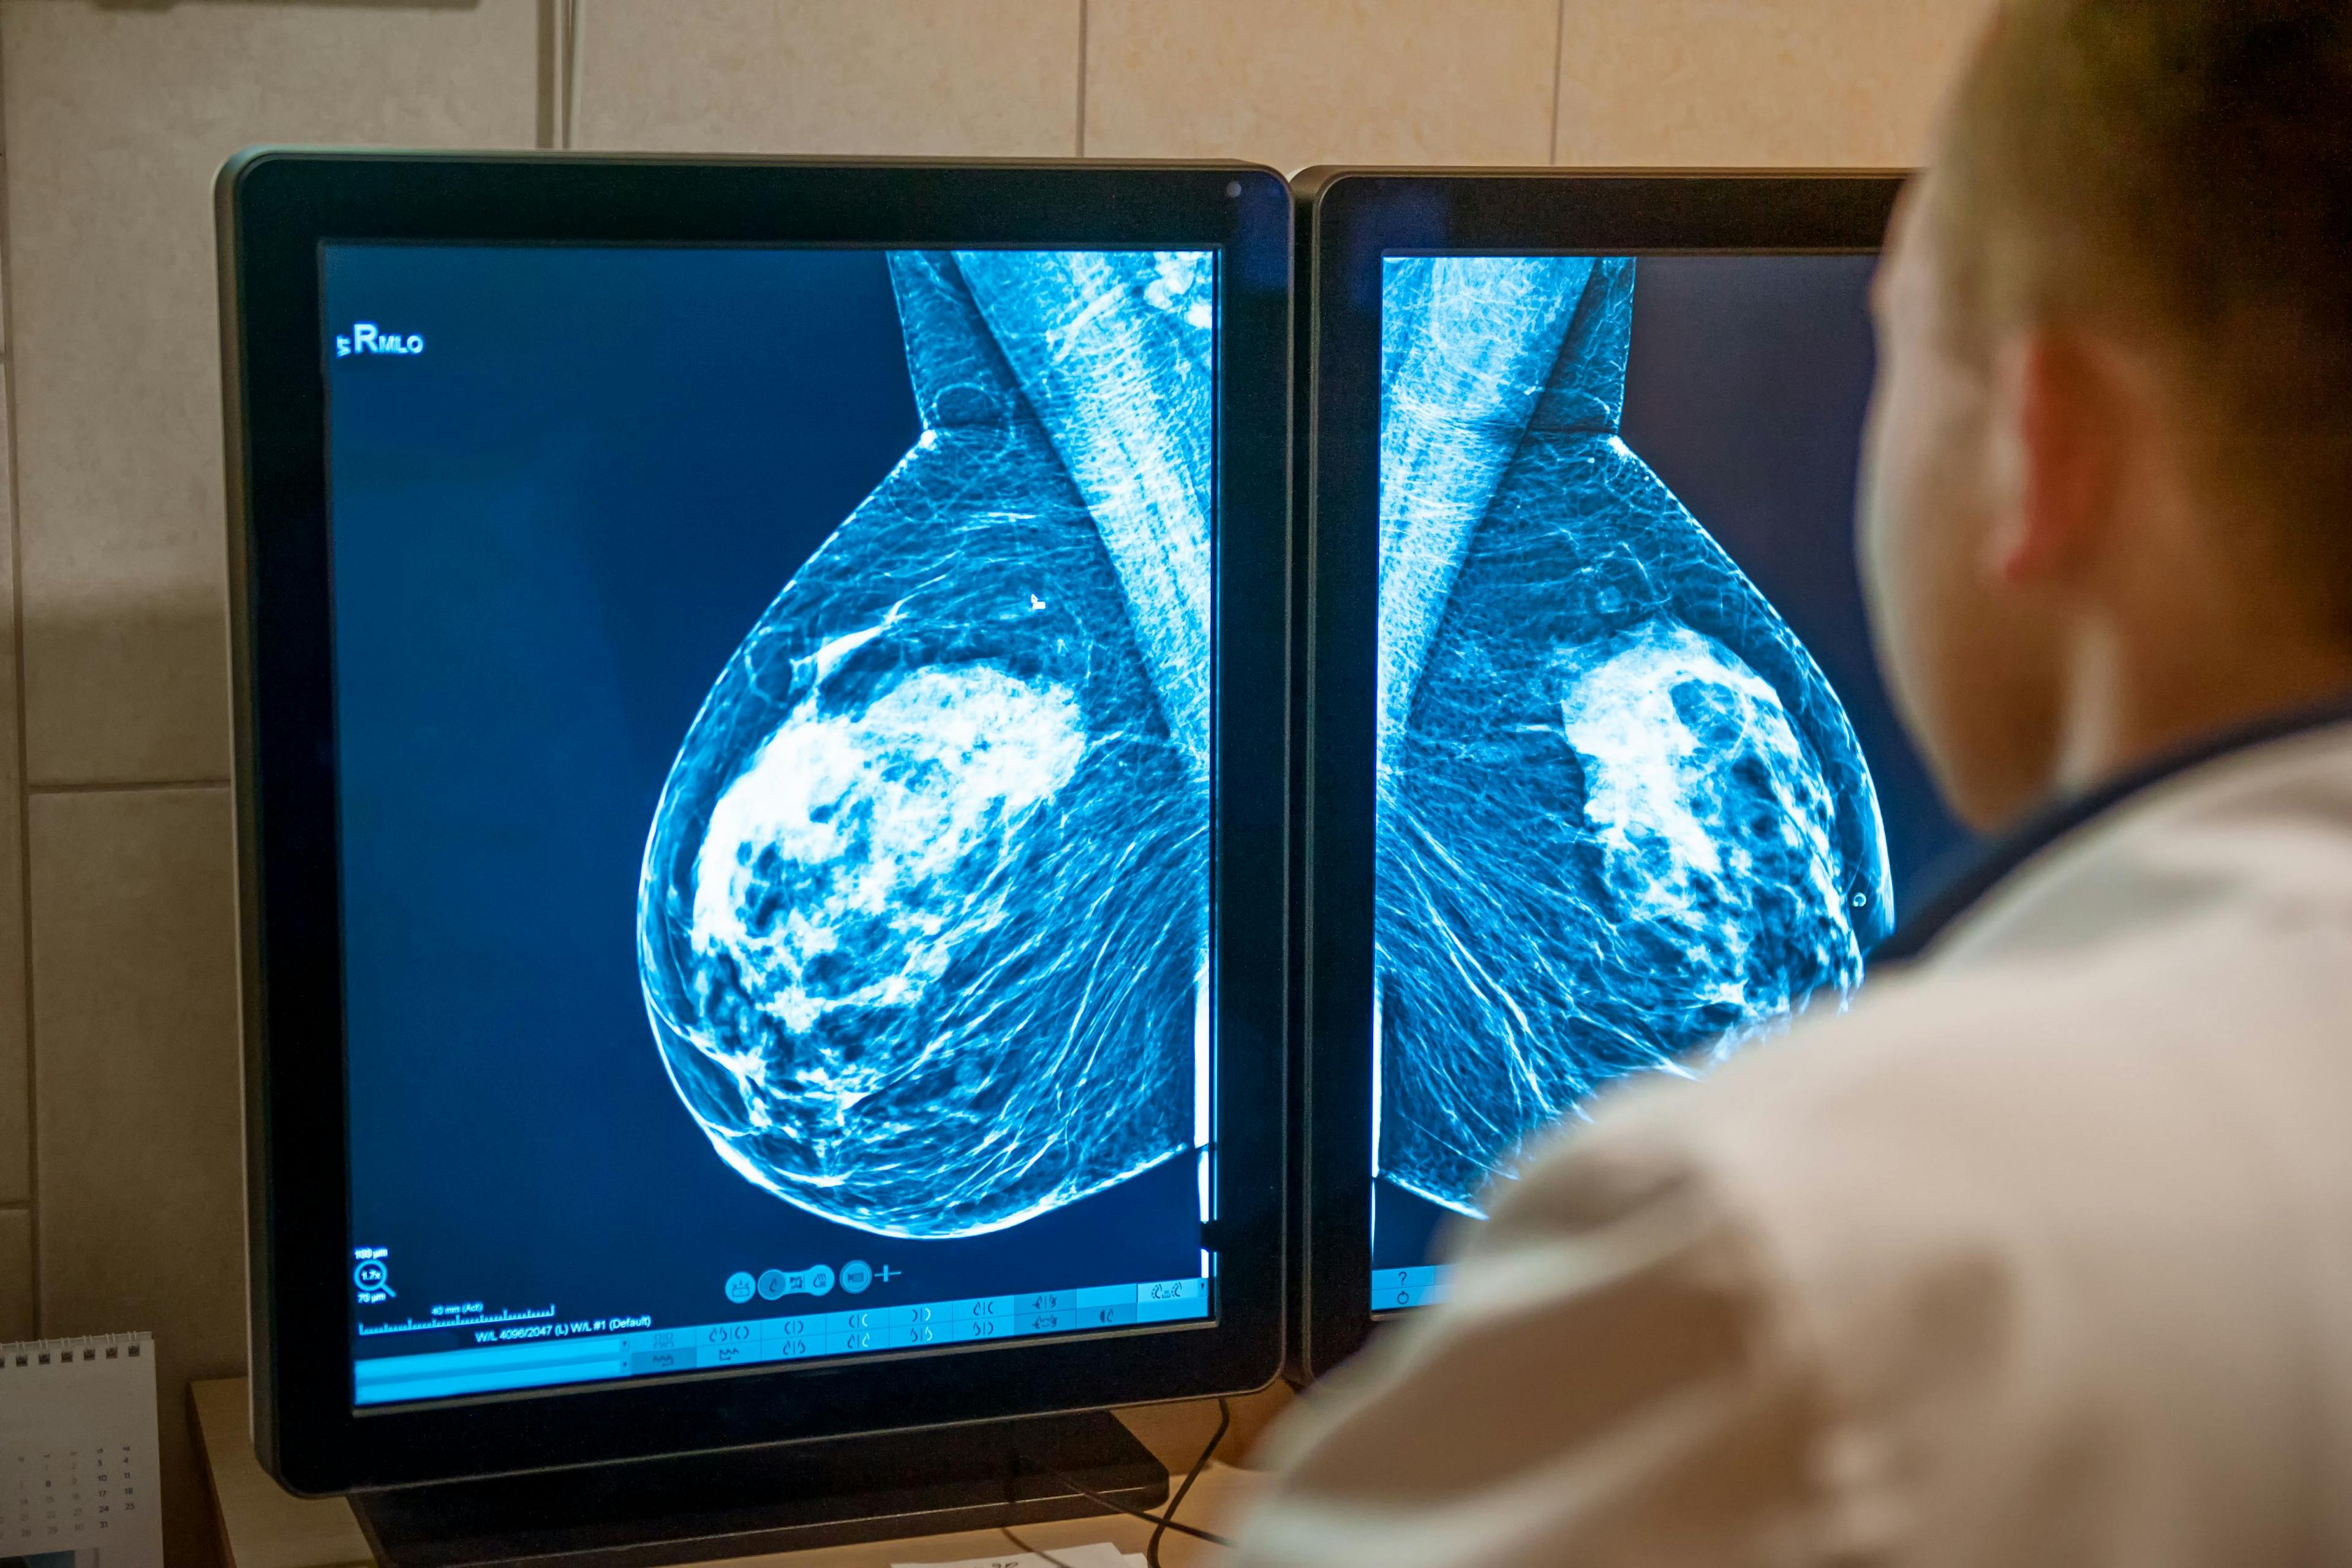 With New Classification of HER2-low Breast Cancer, Pharmacists See Major Paradigm Shifts